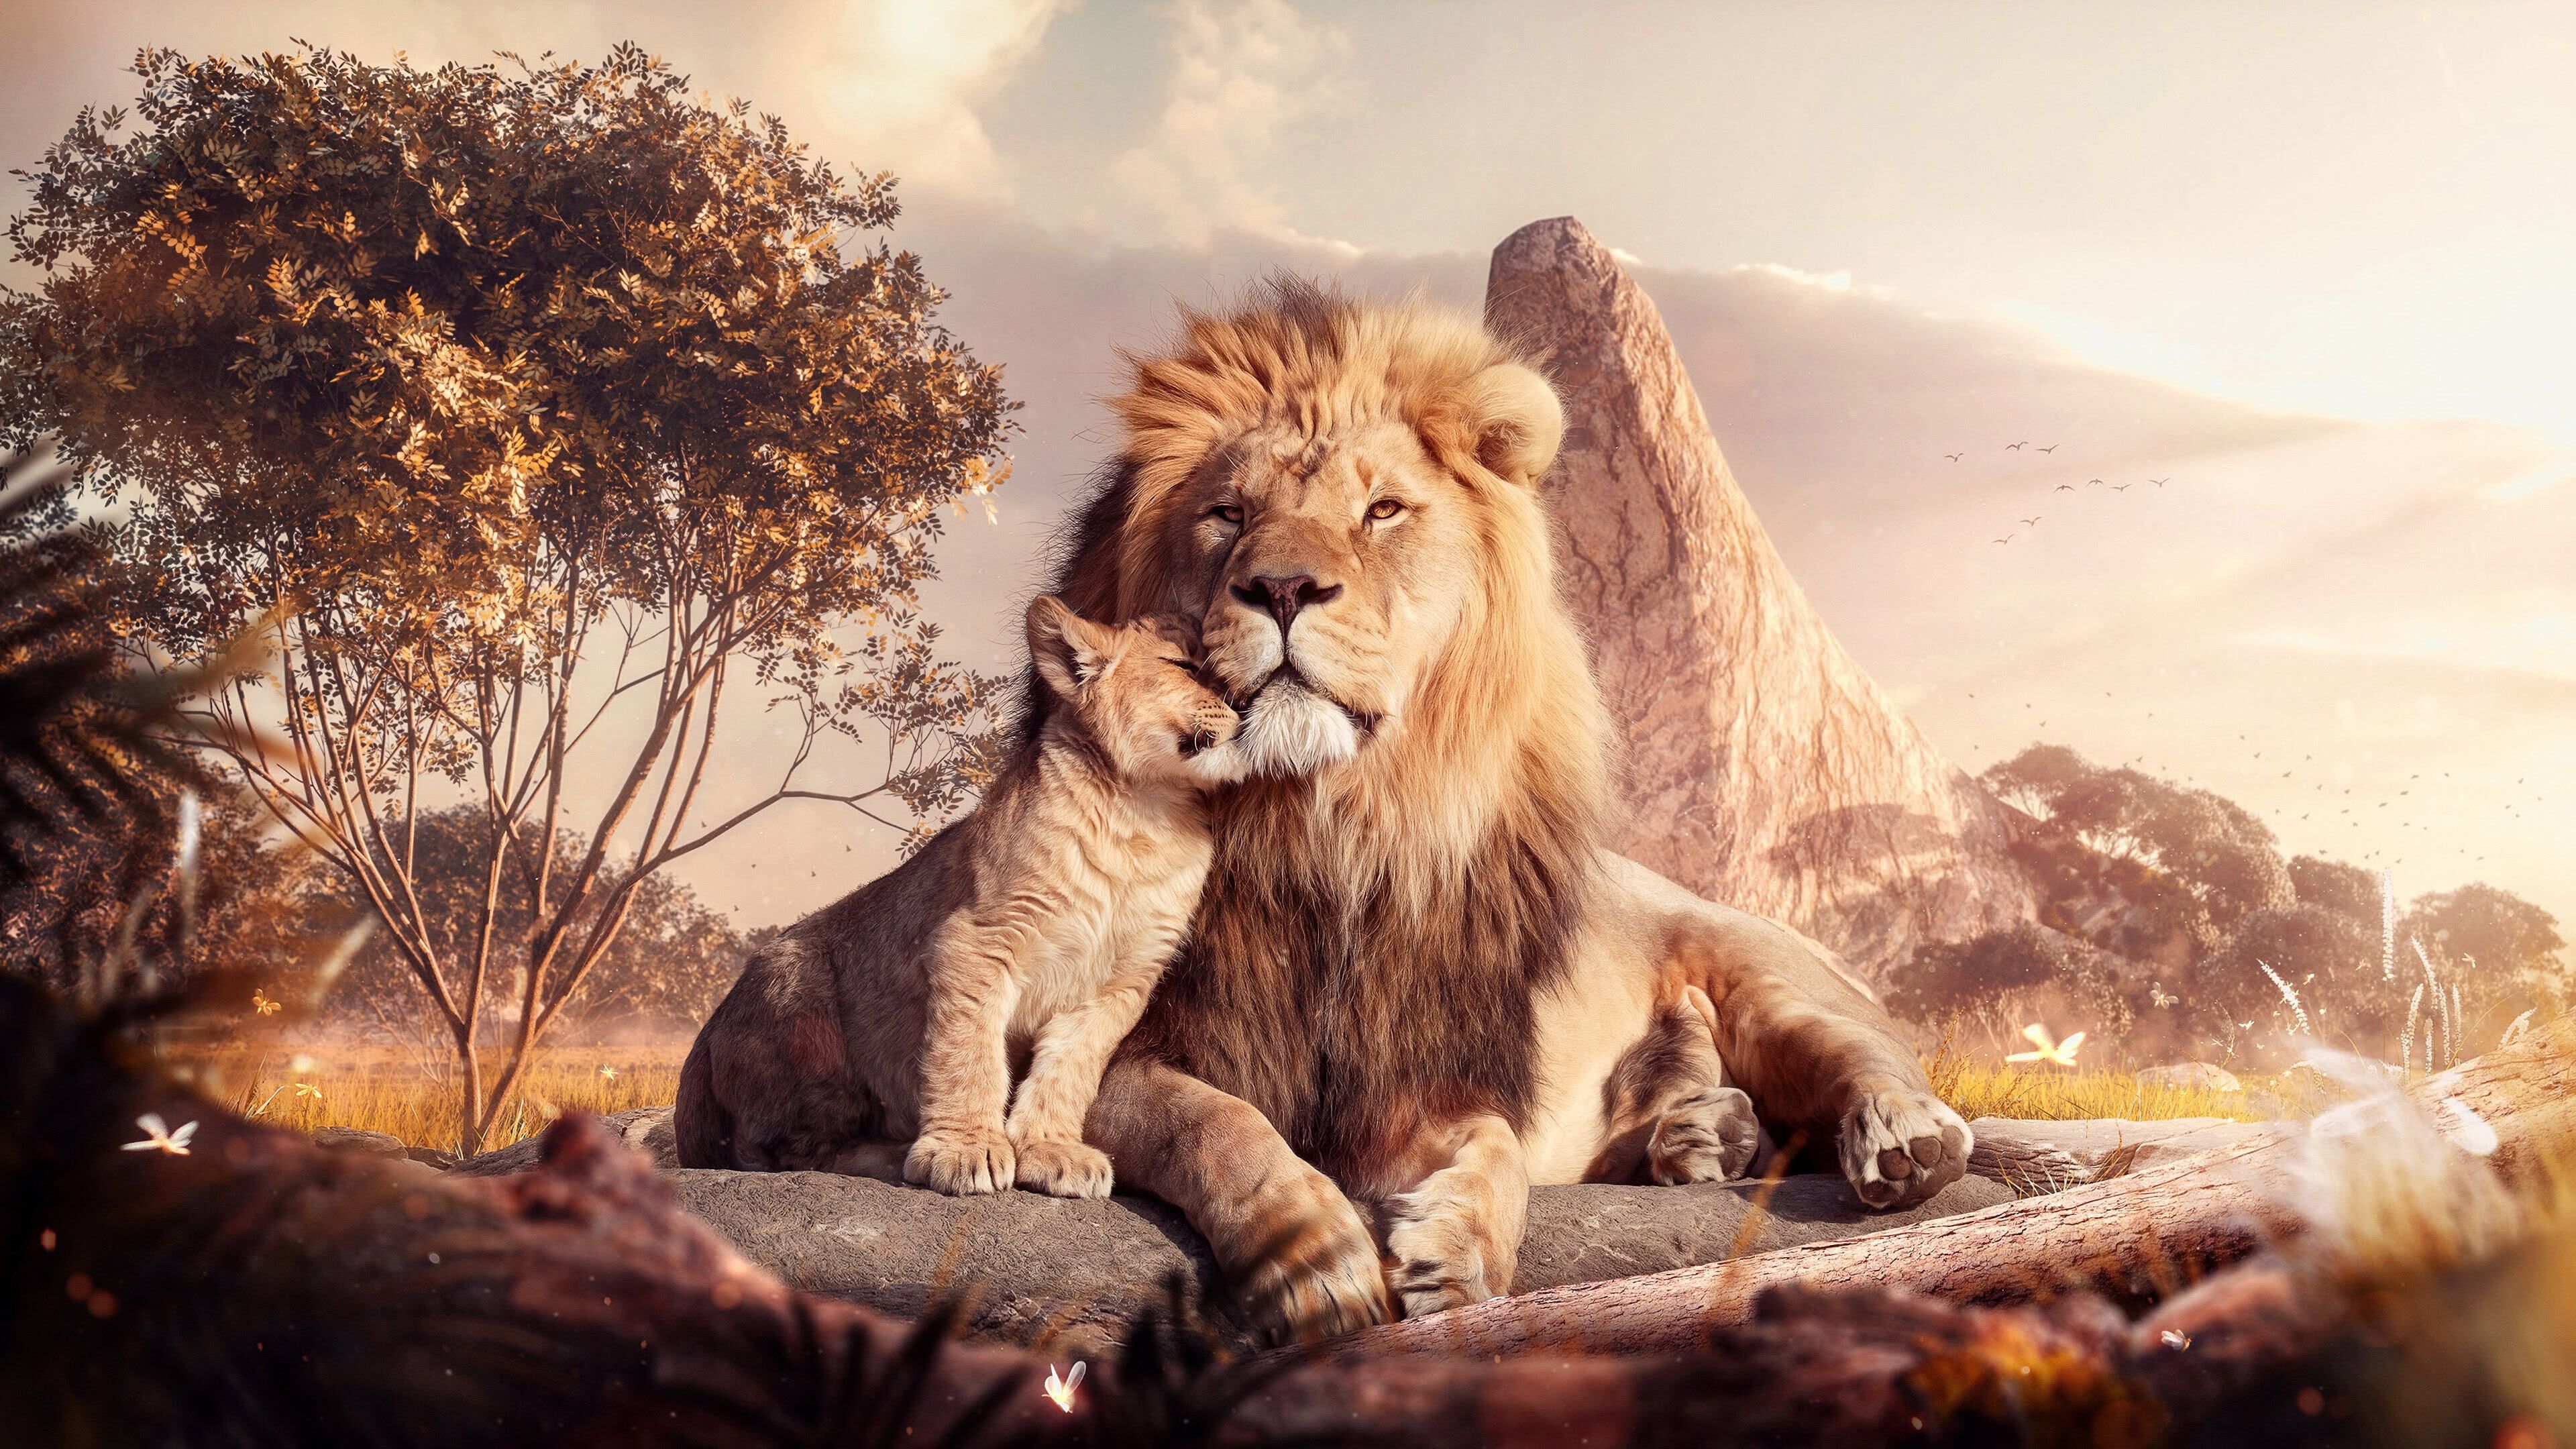 Lion And Cub UHD 4K Wallpapers